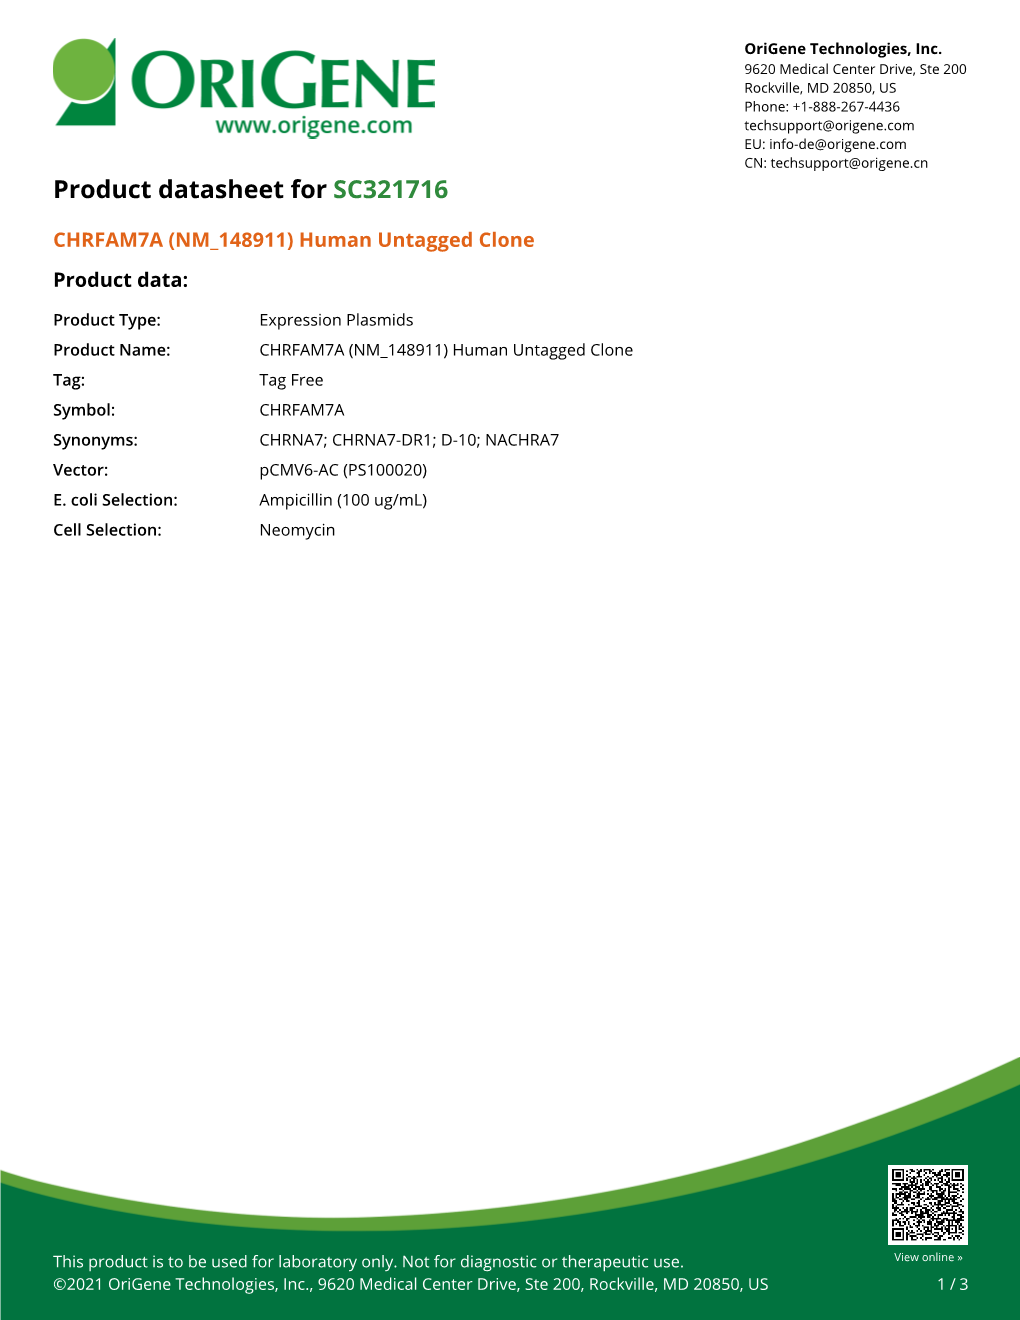 CHRFAM7A (NM 148911) Human Untagged Clone Product Data